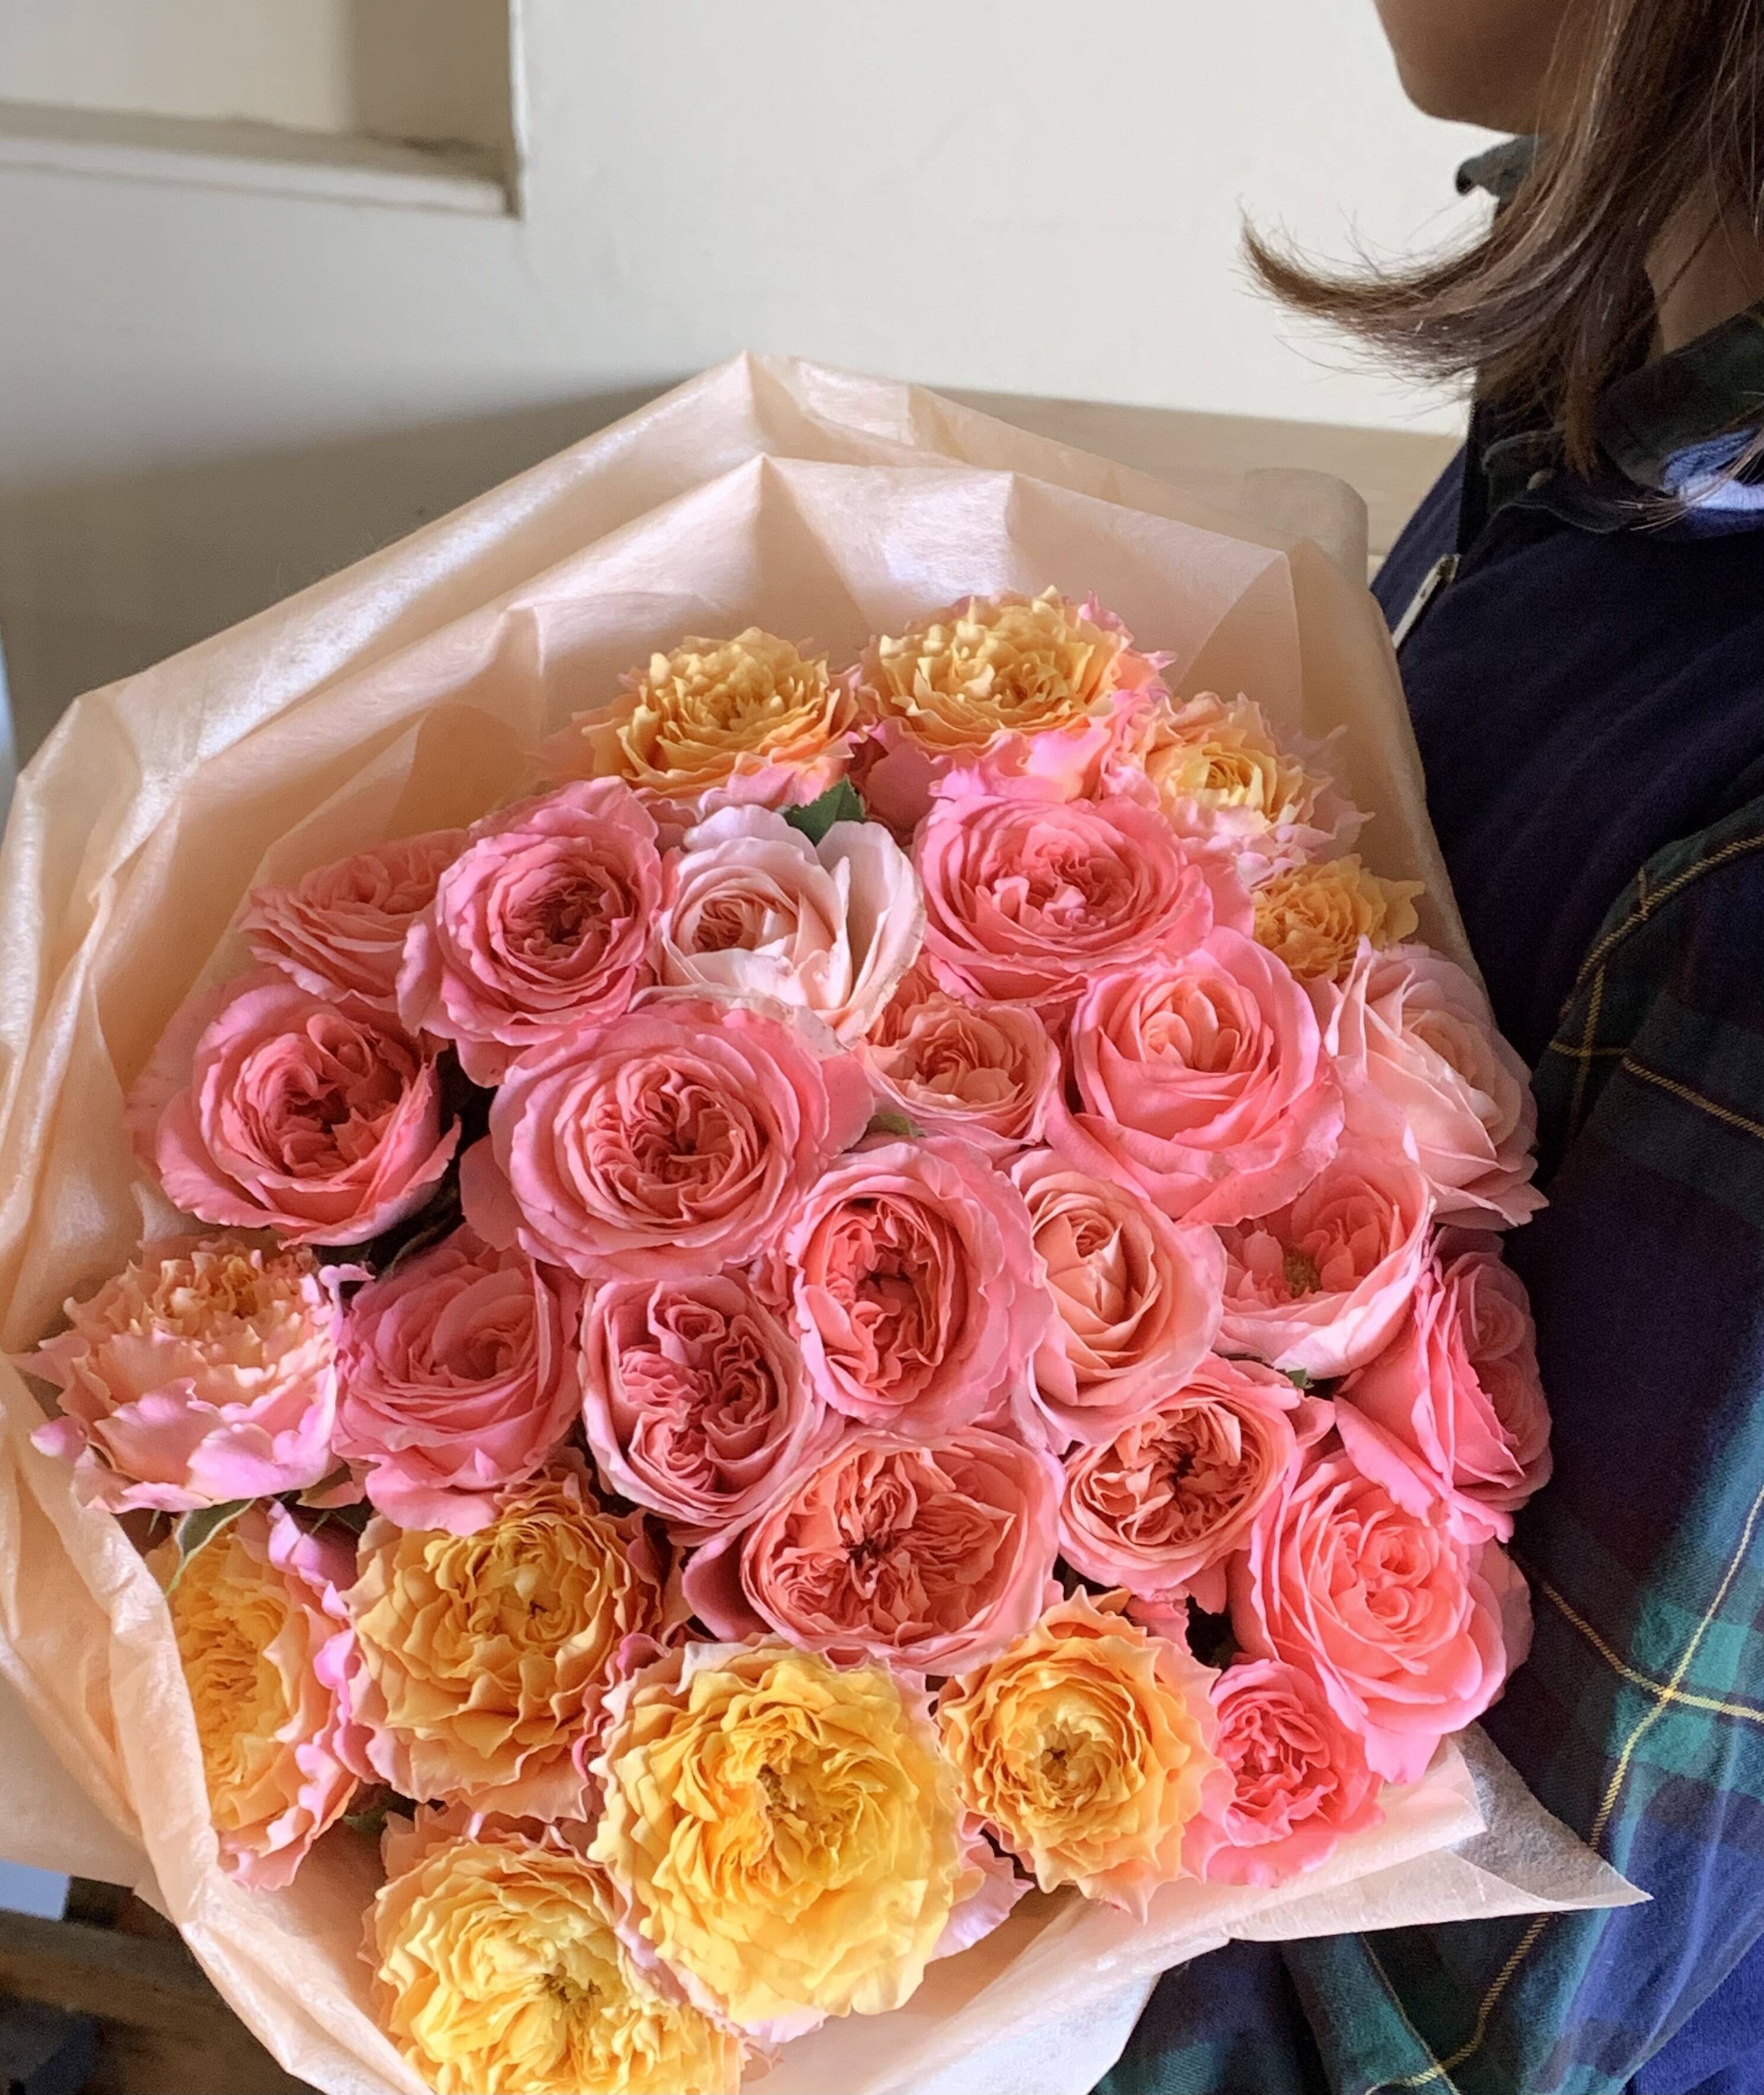 🍴 Eat choku ｜ [New product] Classical blooming roses & different blooms, juicy colors anyway cute mix bouquet ︎ Length about 40cm [2 ...